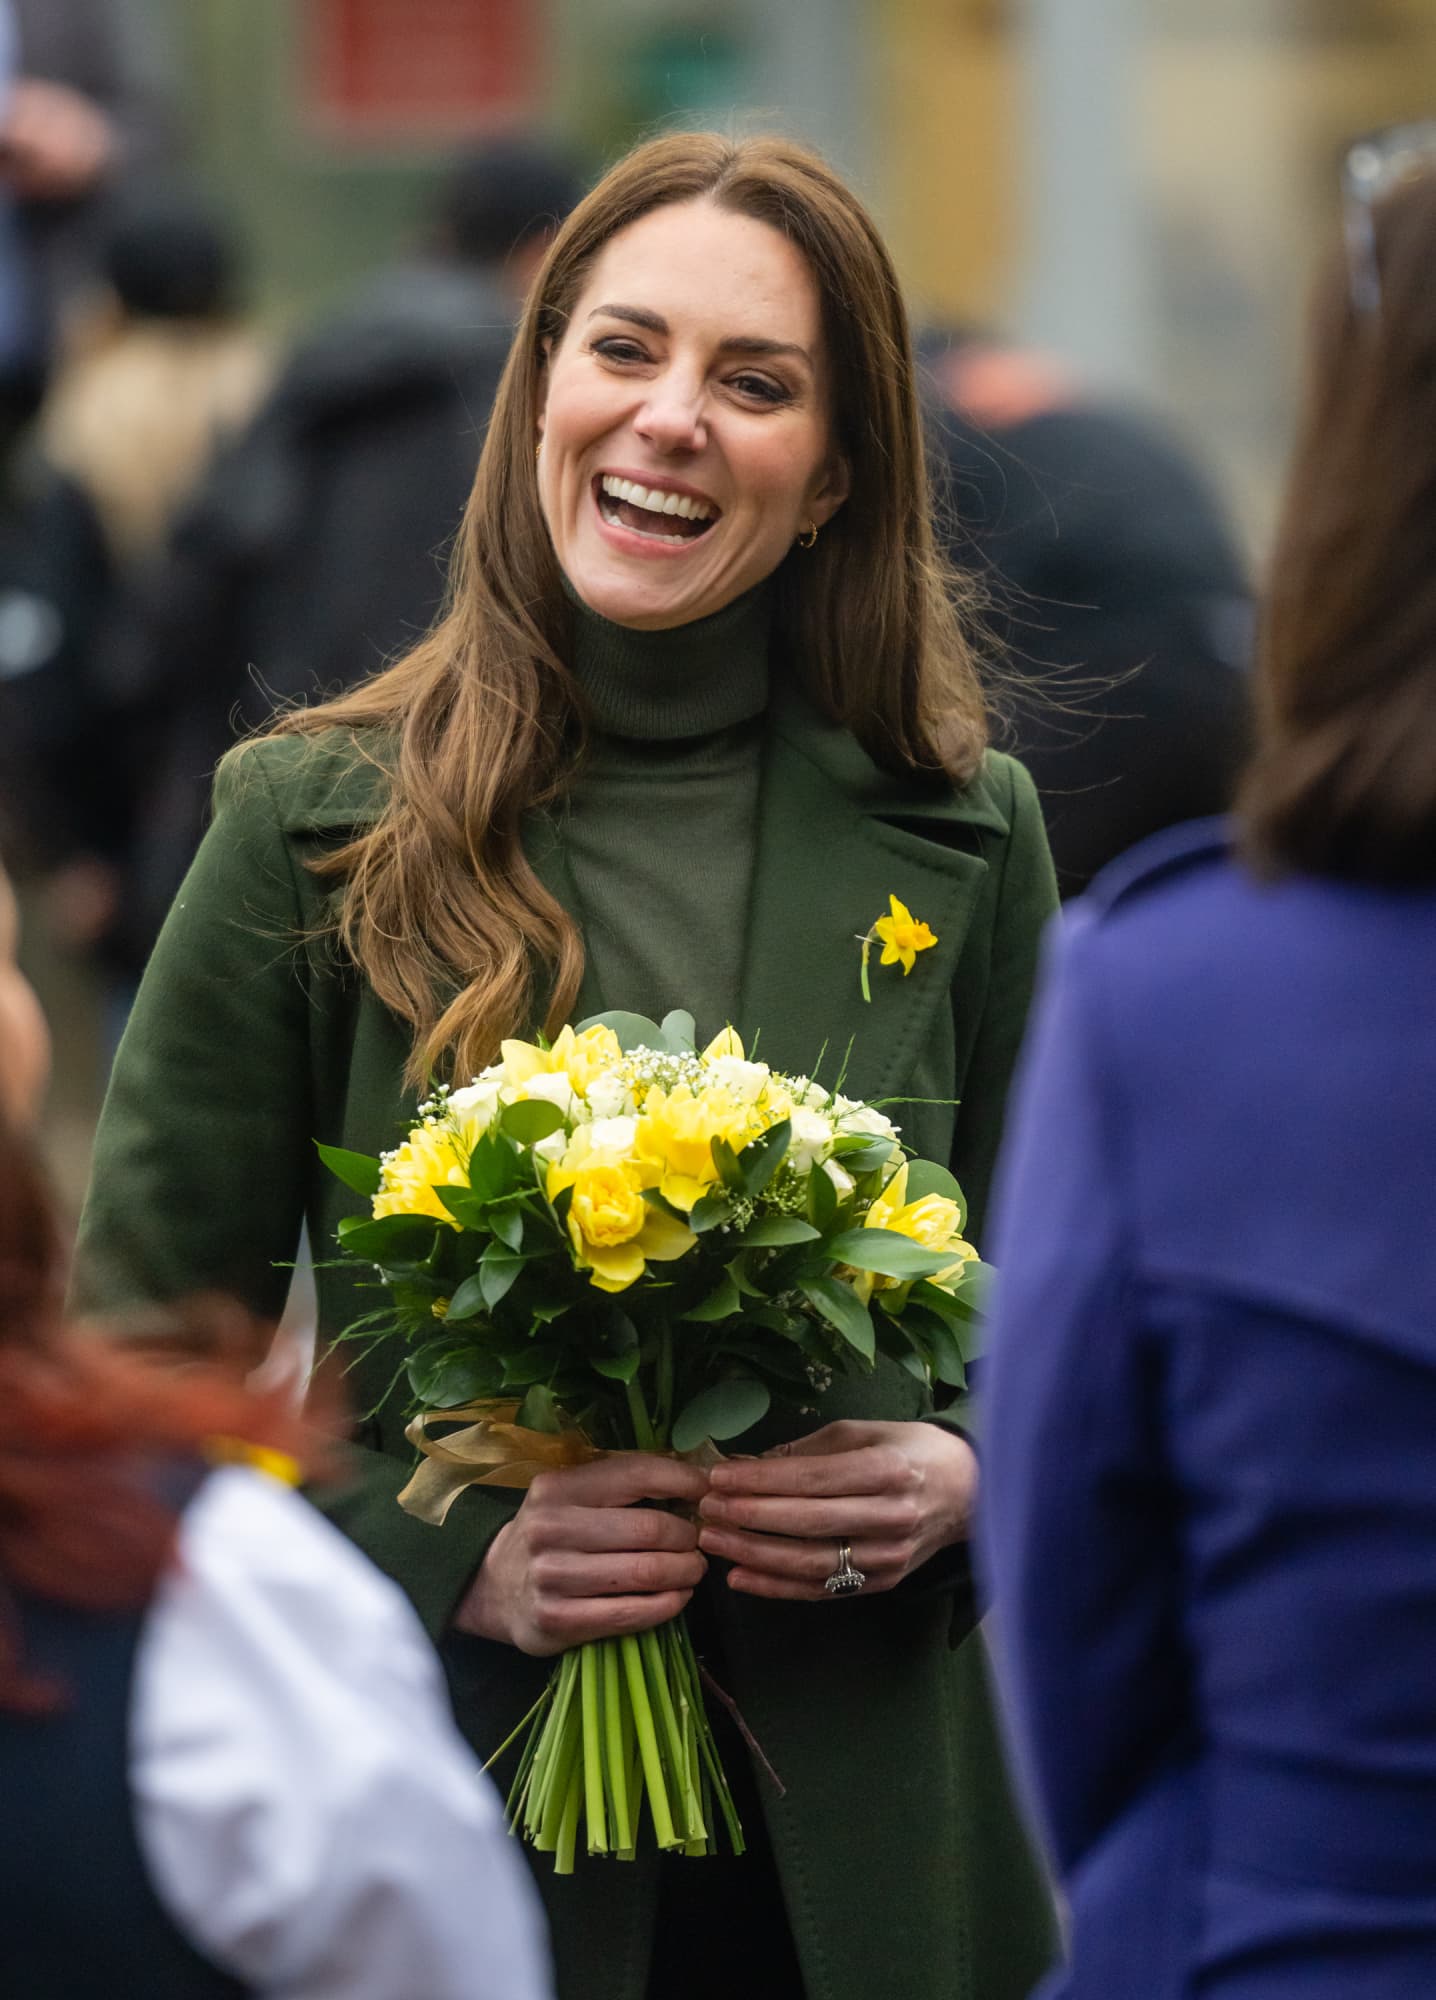 Kate Middleton While on a visit to the Blaenavon Heritage Centre